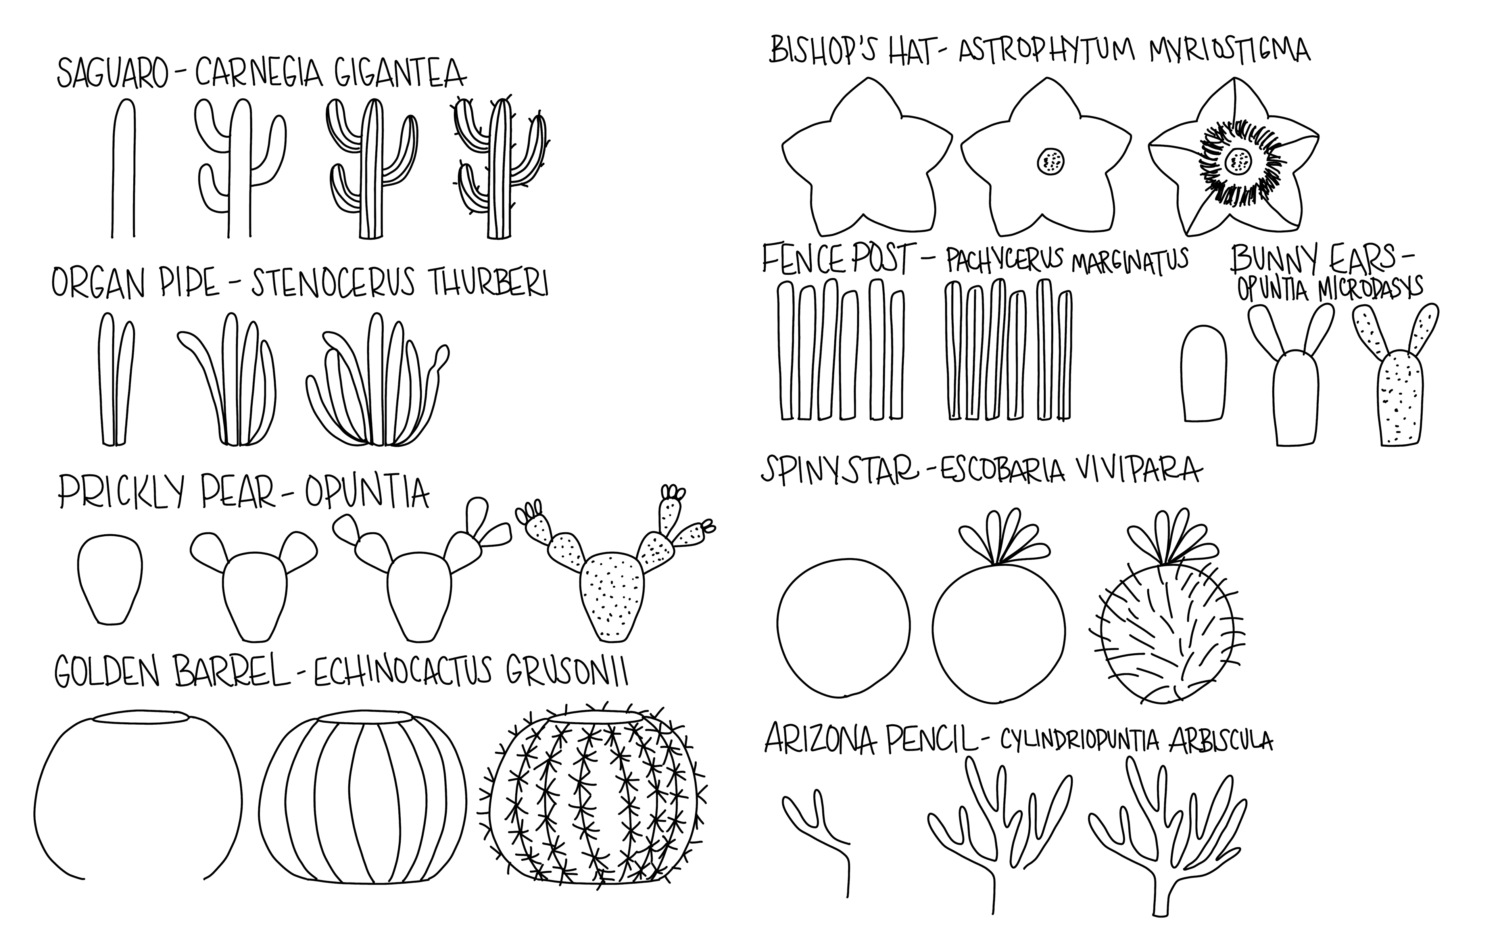 Image contains step by step illustrations for how to create each of the nine cactus doodles. These images are the free printable download referenced in the materials list.